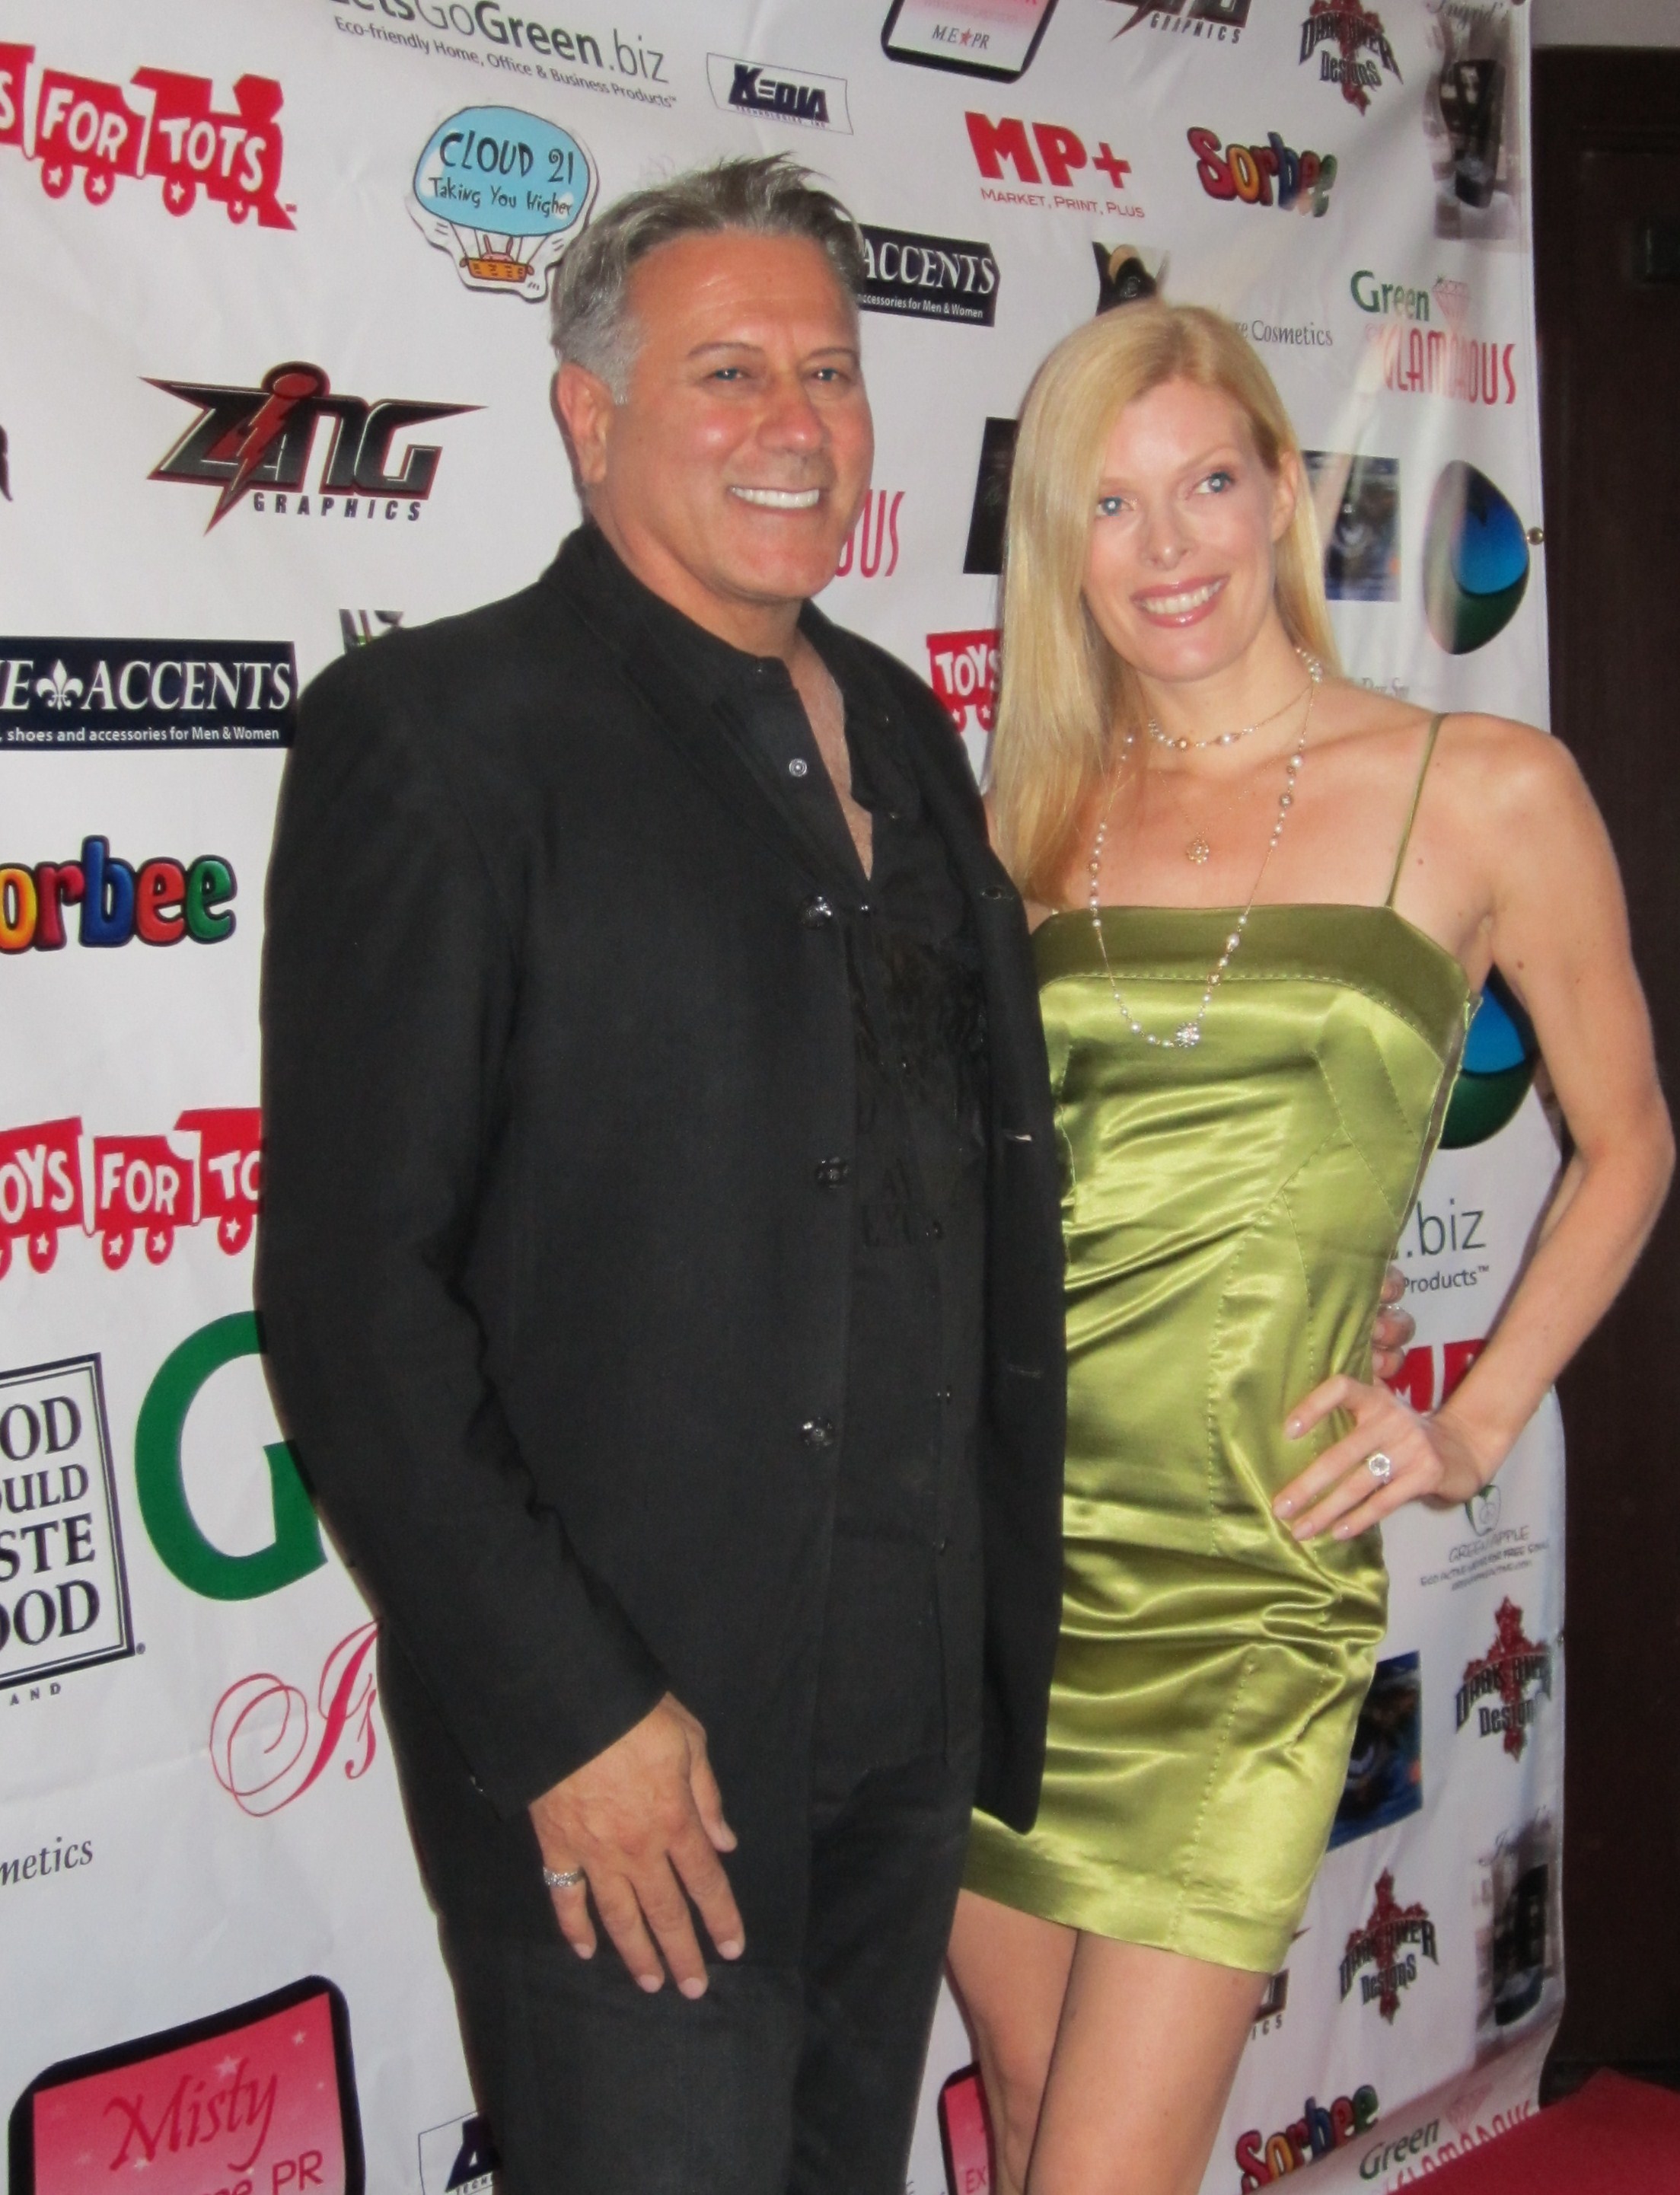 Green is Glamorous fundraiser for 'toys for tots'.